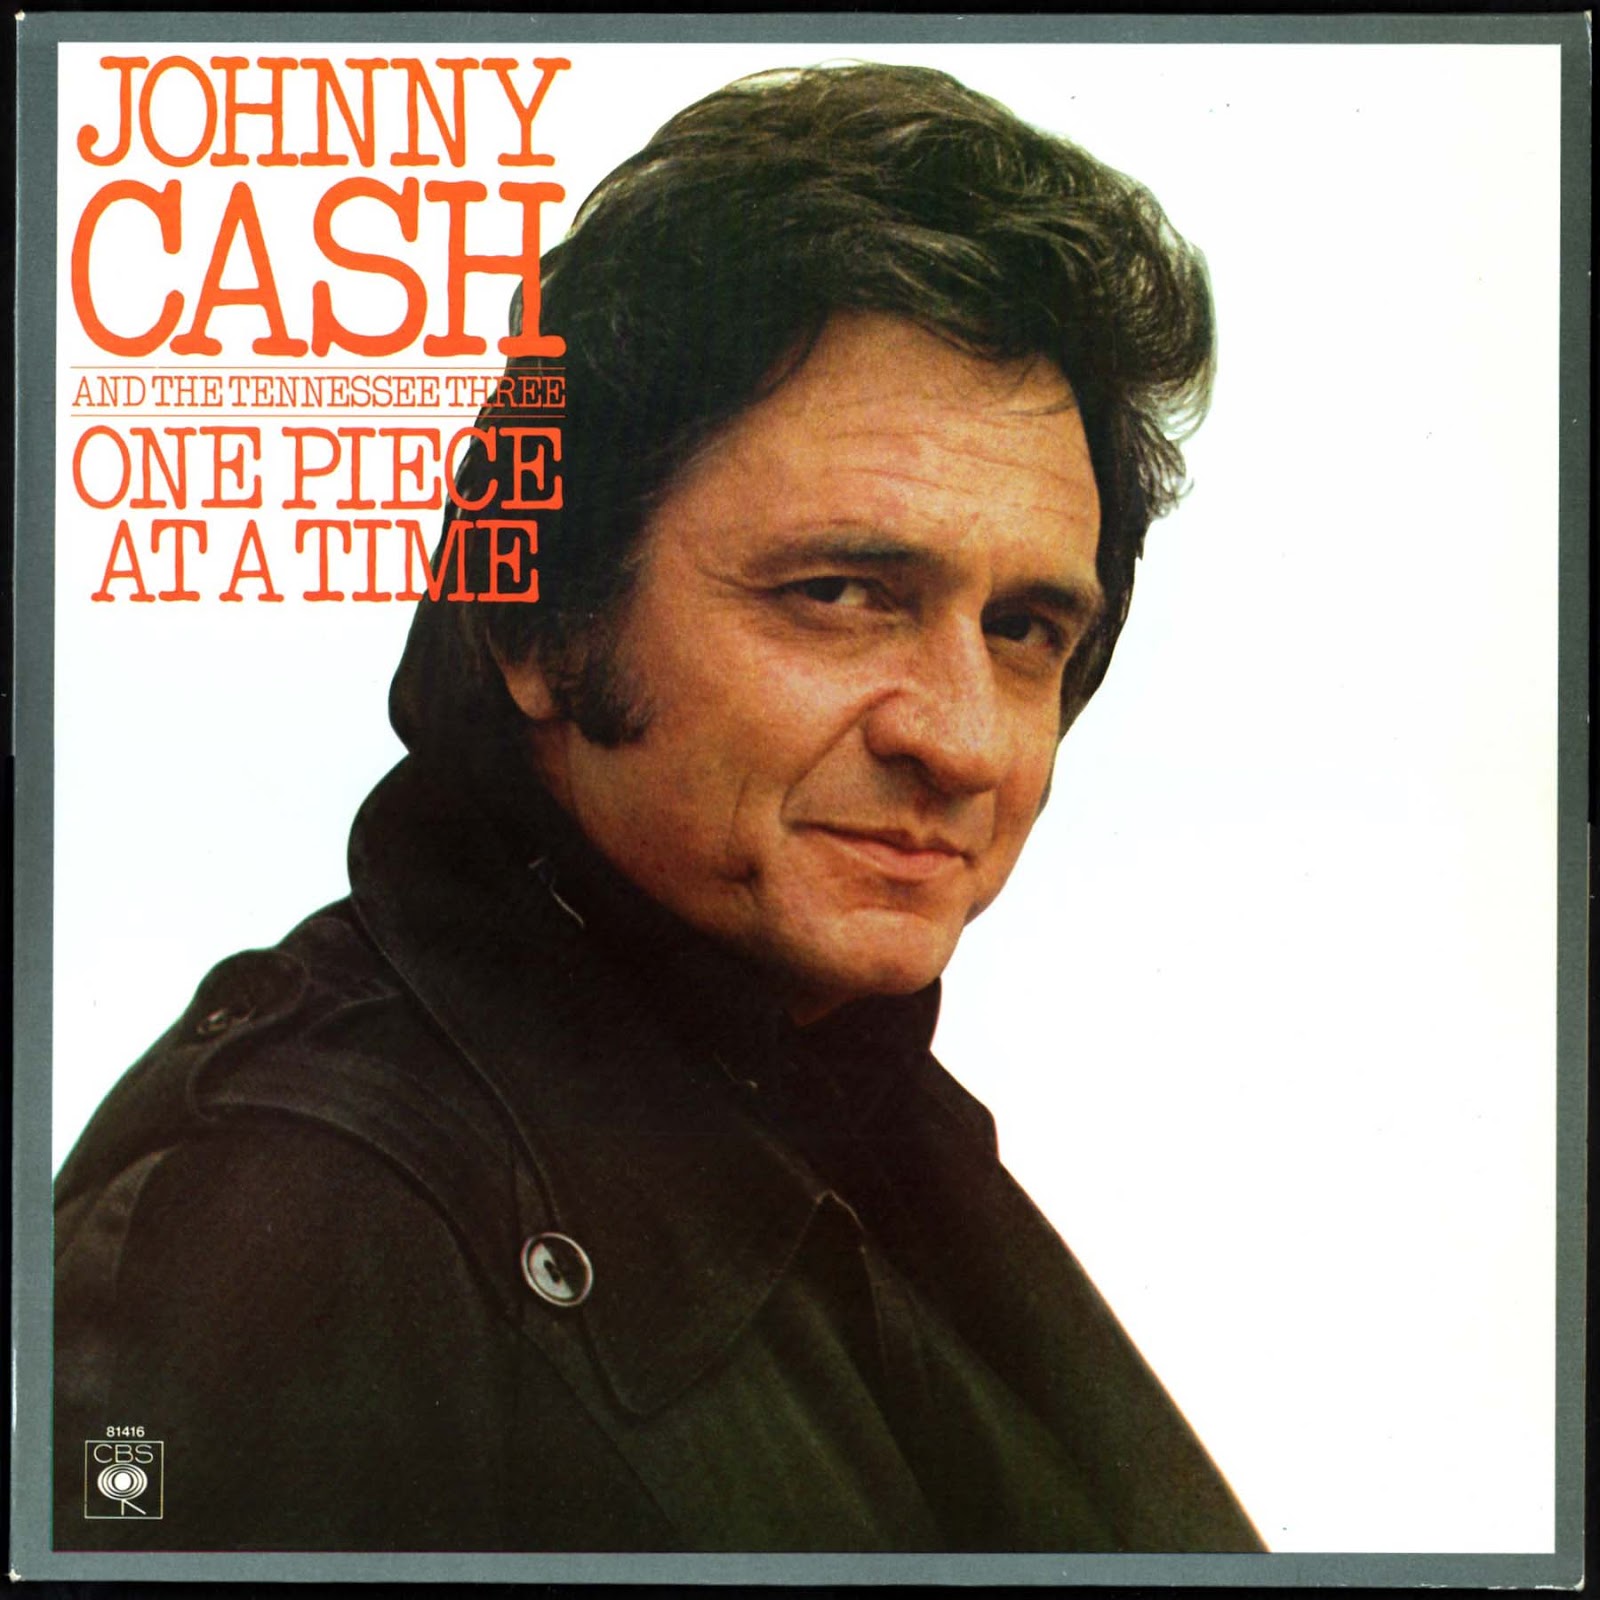 Johnny Cash One Piece at a Time